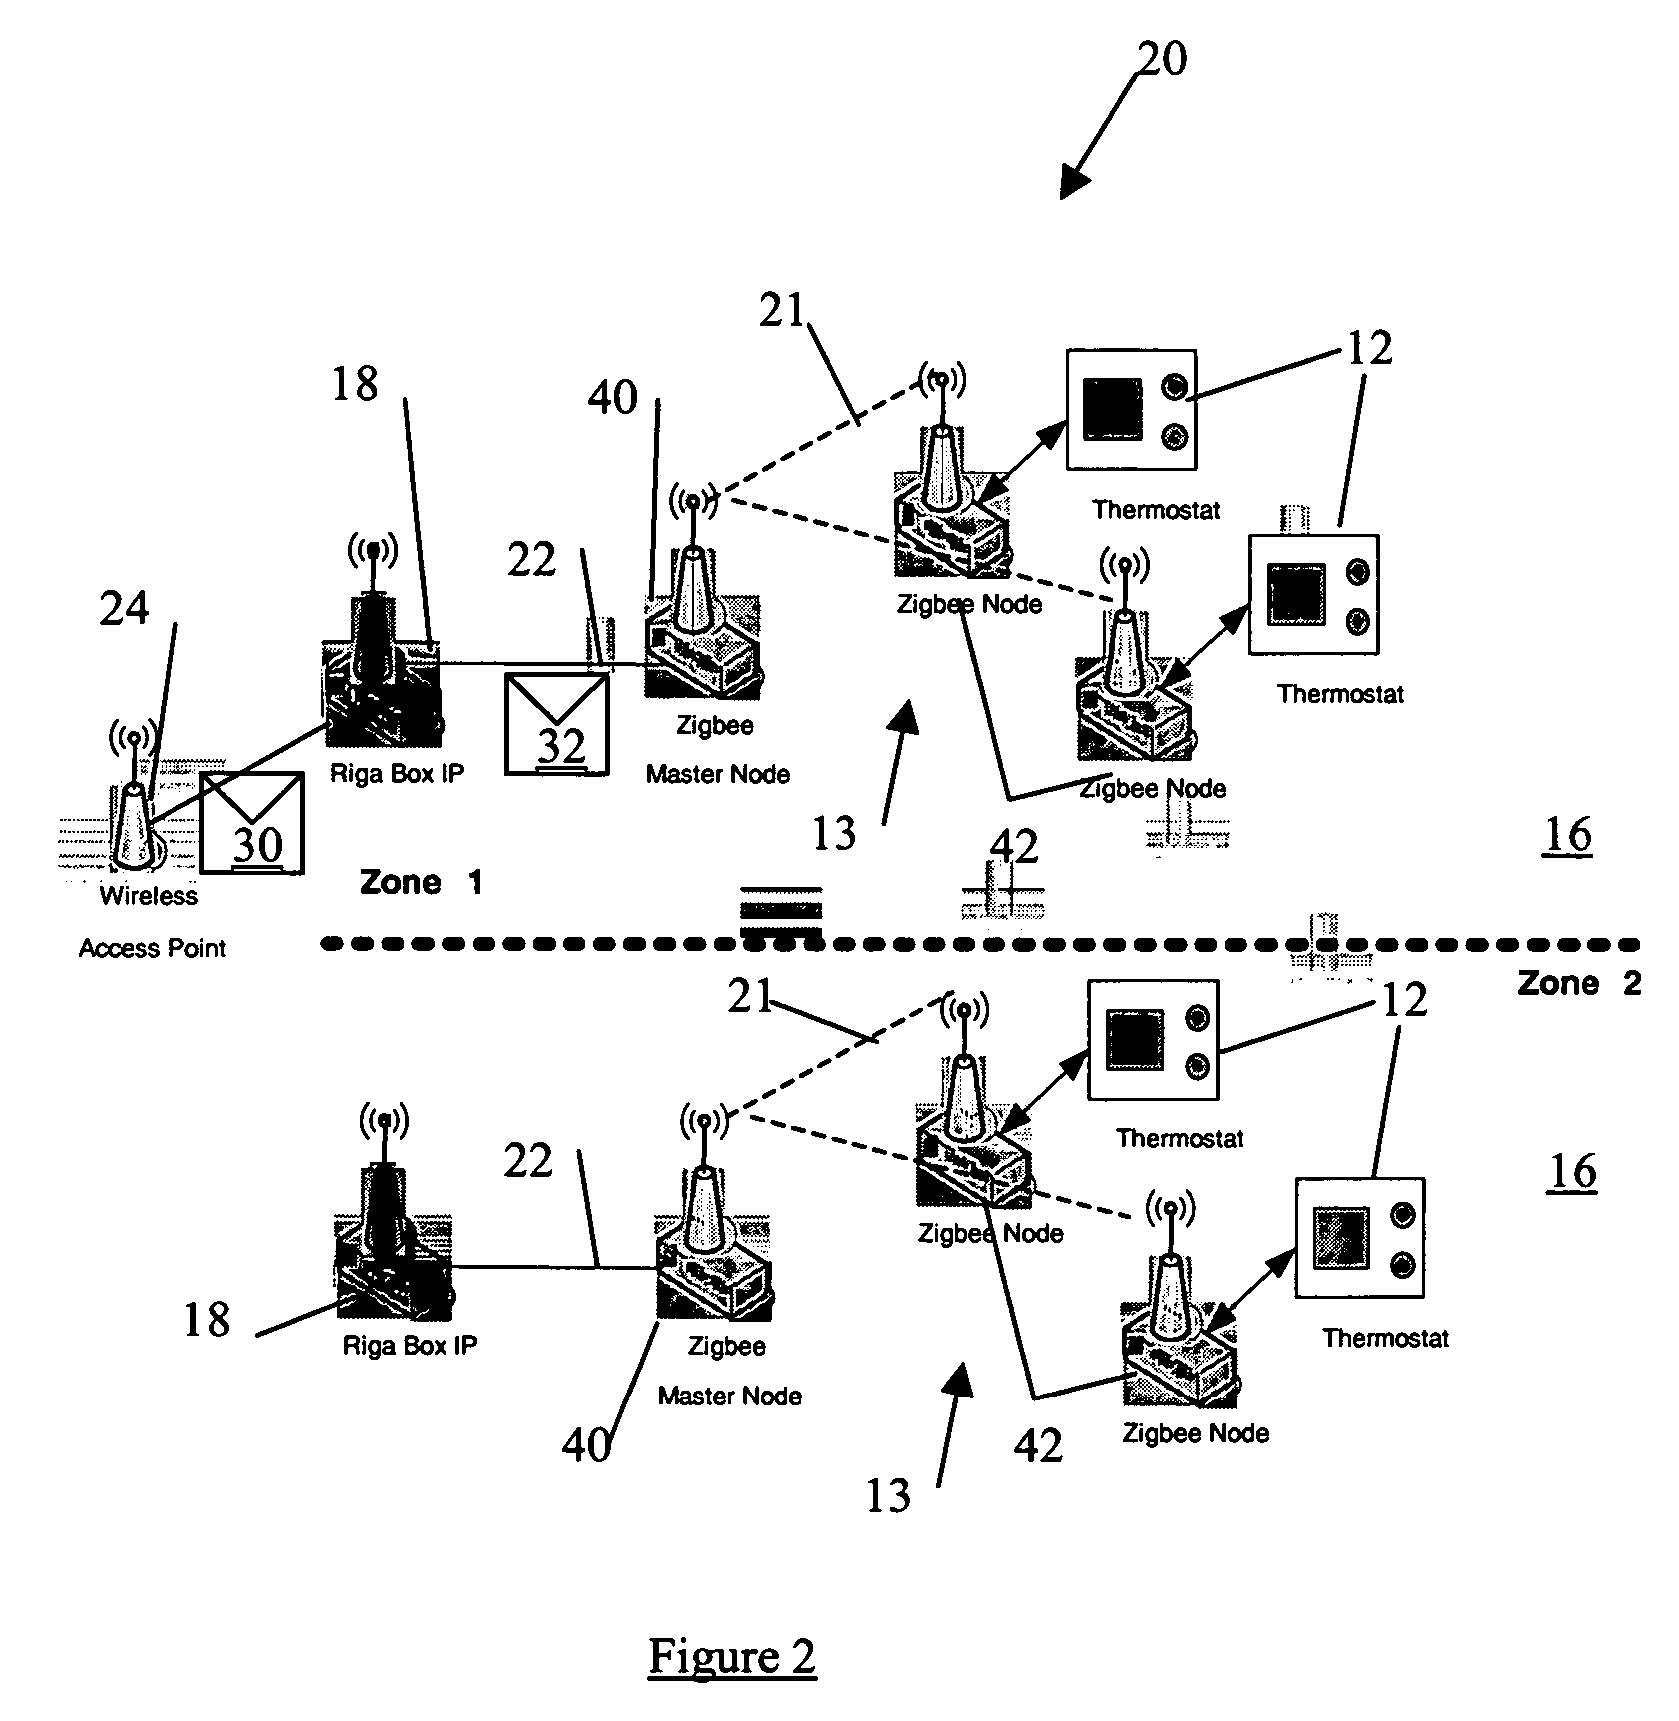 System and method for remote control of local devices over a wide area network